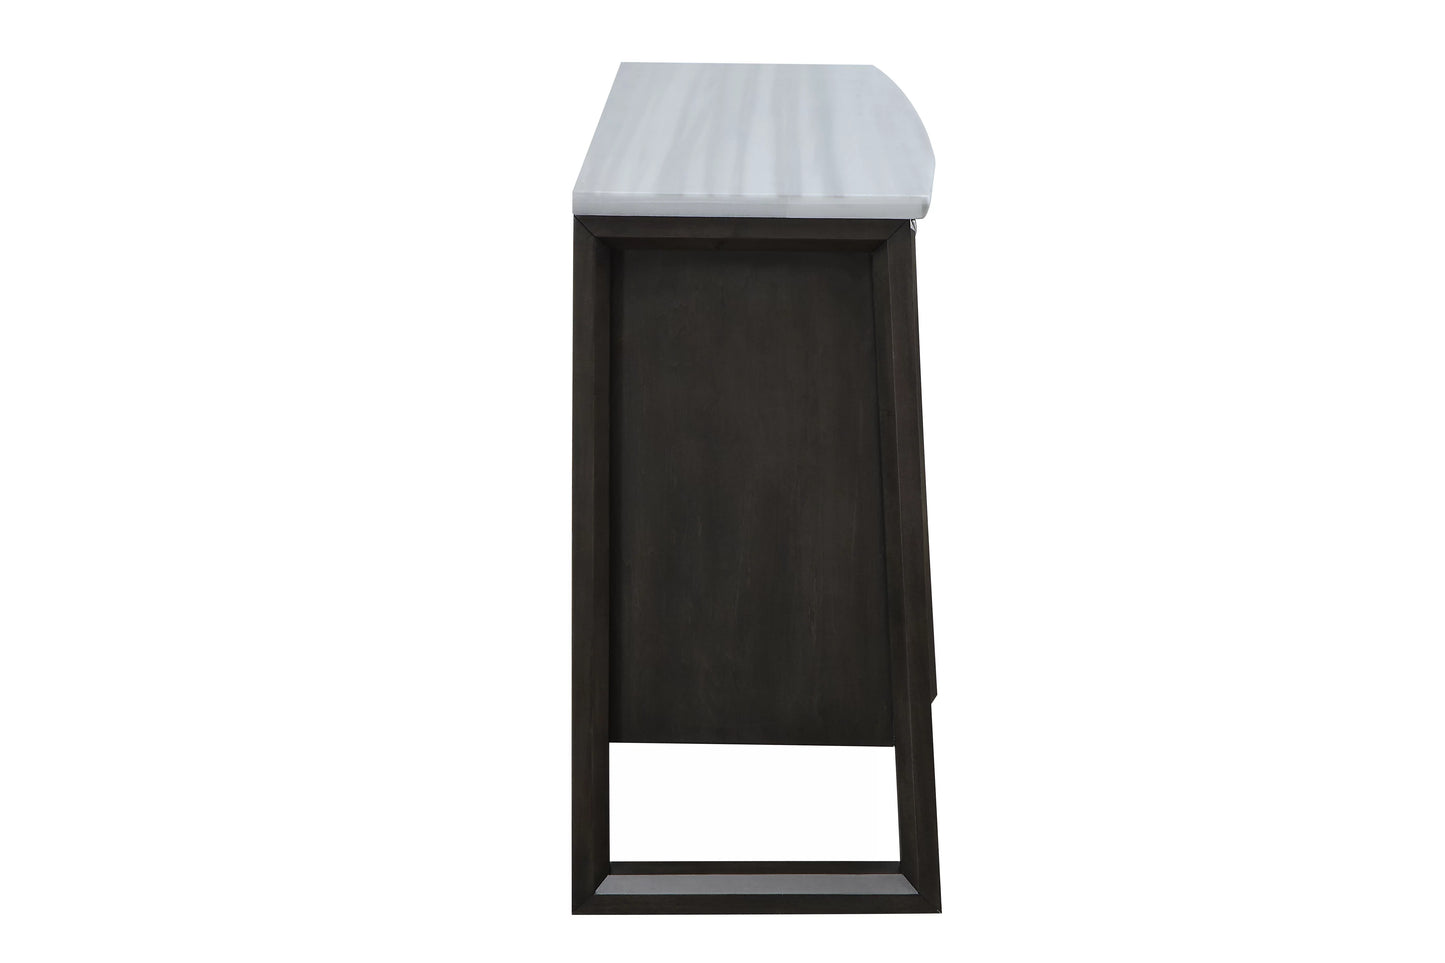 Acme Madan Wooden Frame Server in Marble and Gray Oak